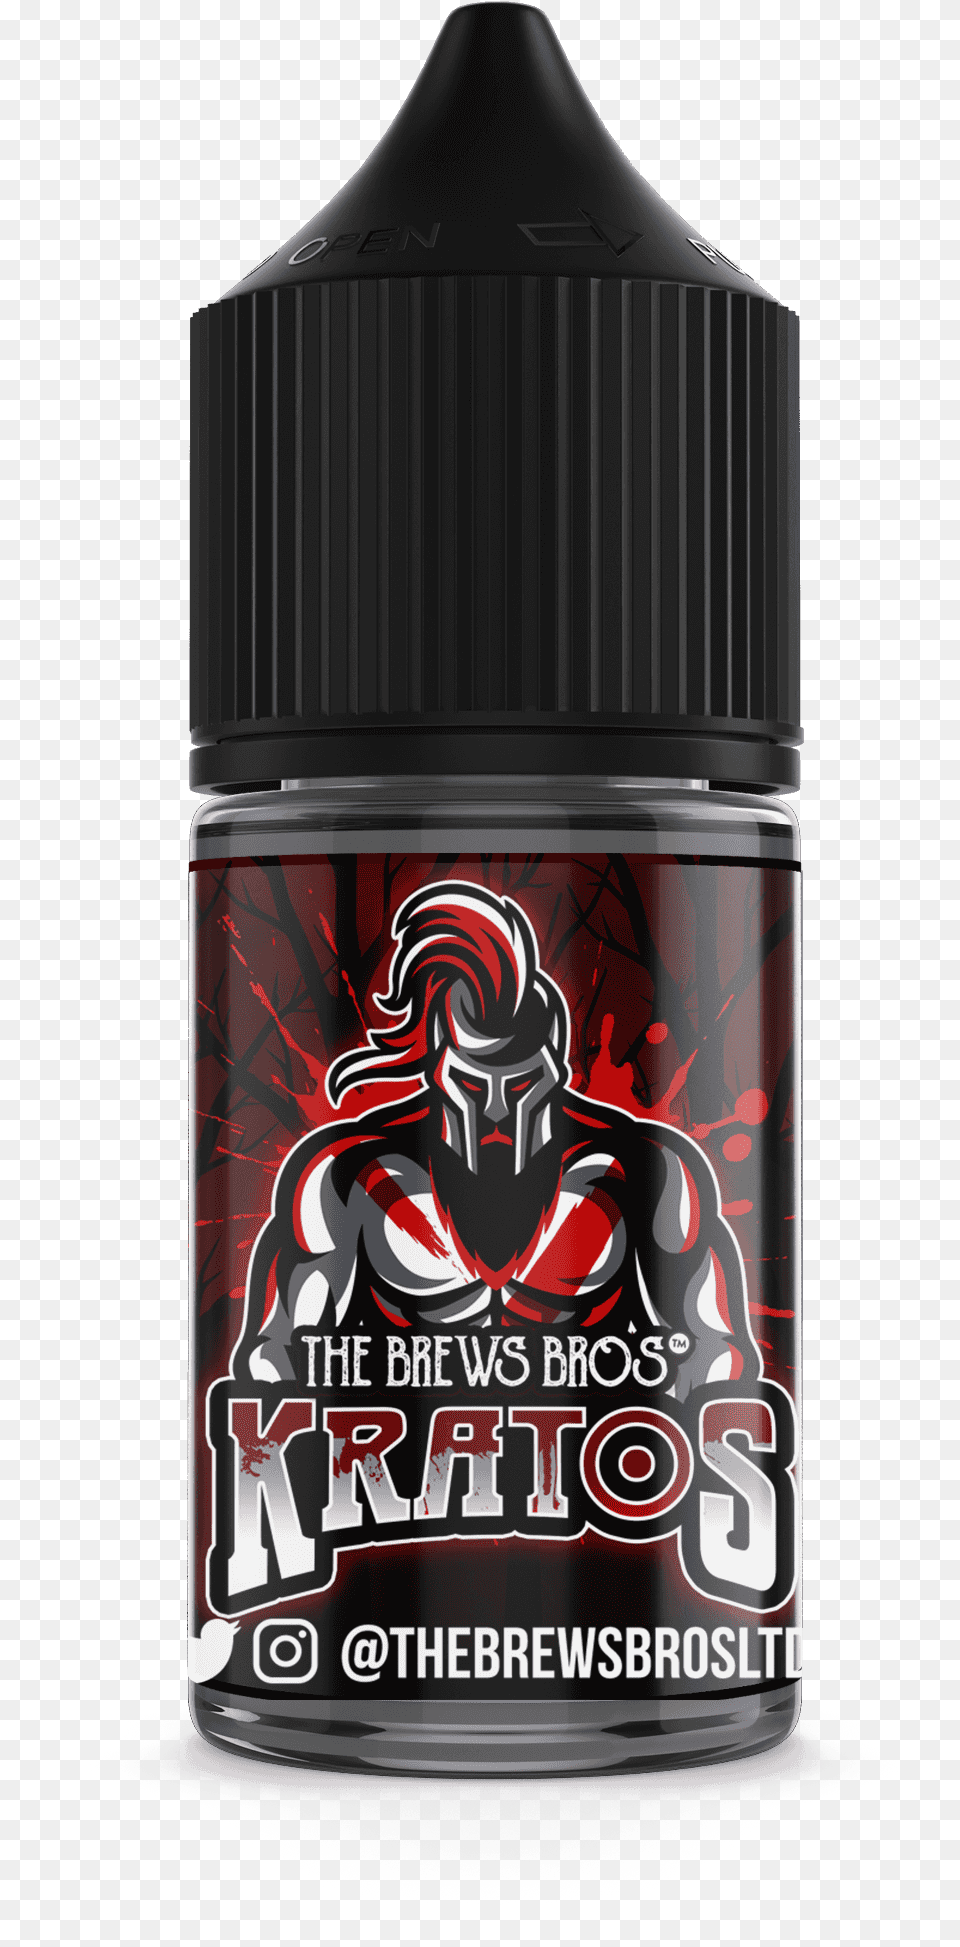 Kratos Diy E Liquid Flavour Concentrate By Brews Bros Missile, Bottle, Alcohol, Beer, Beverage Free Png